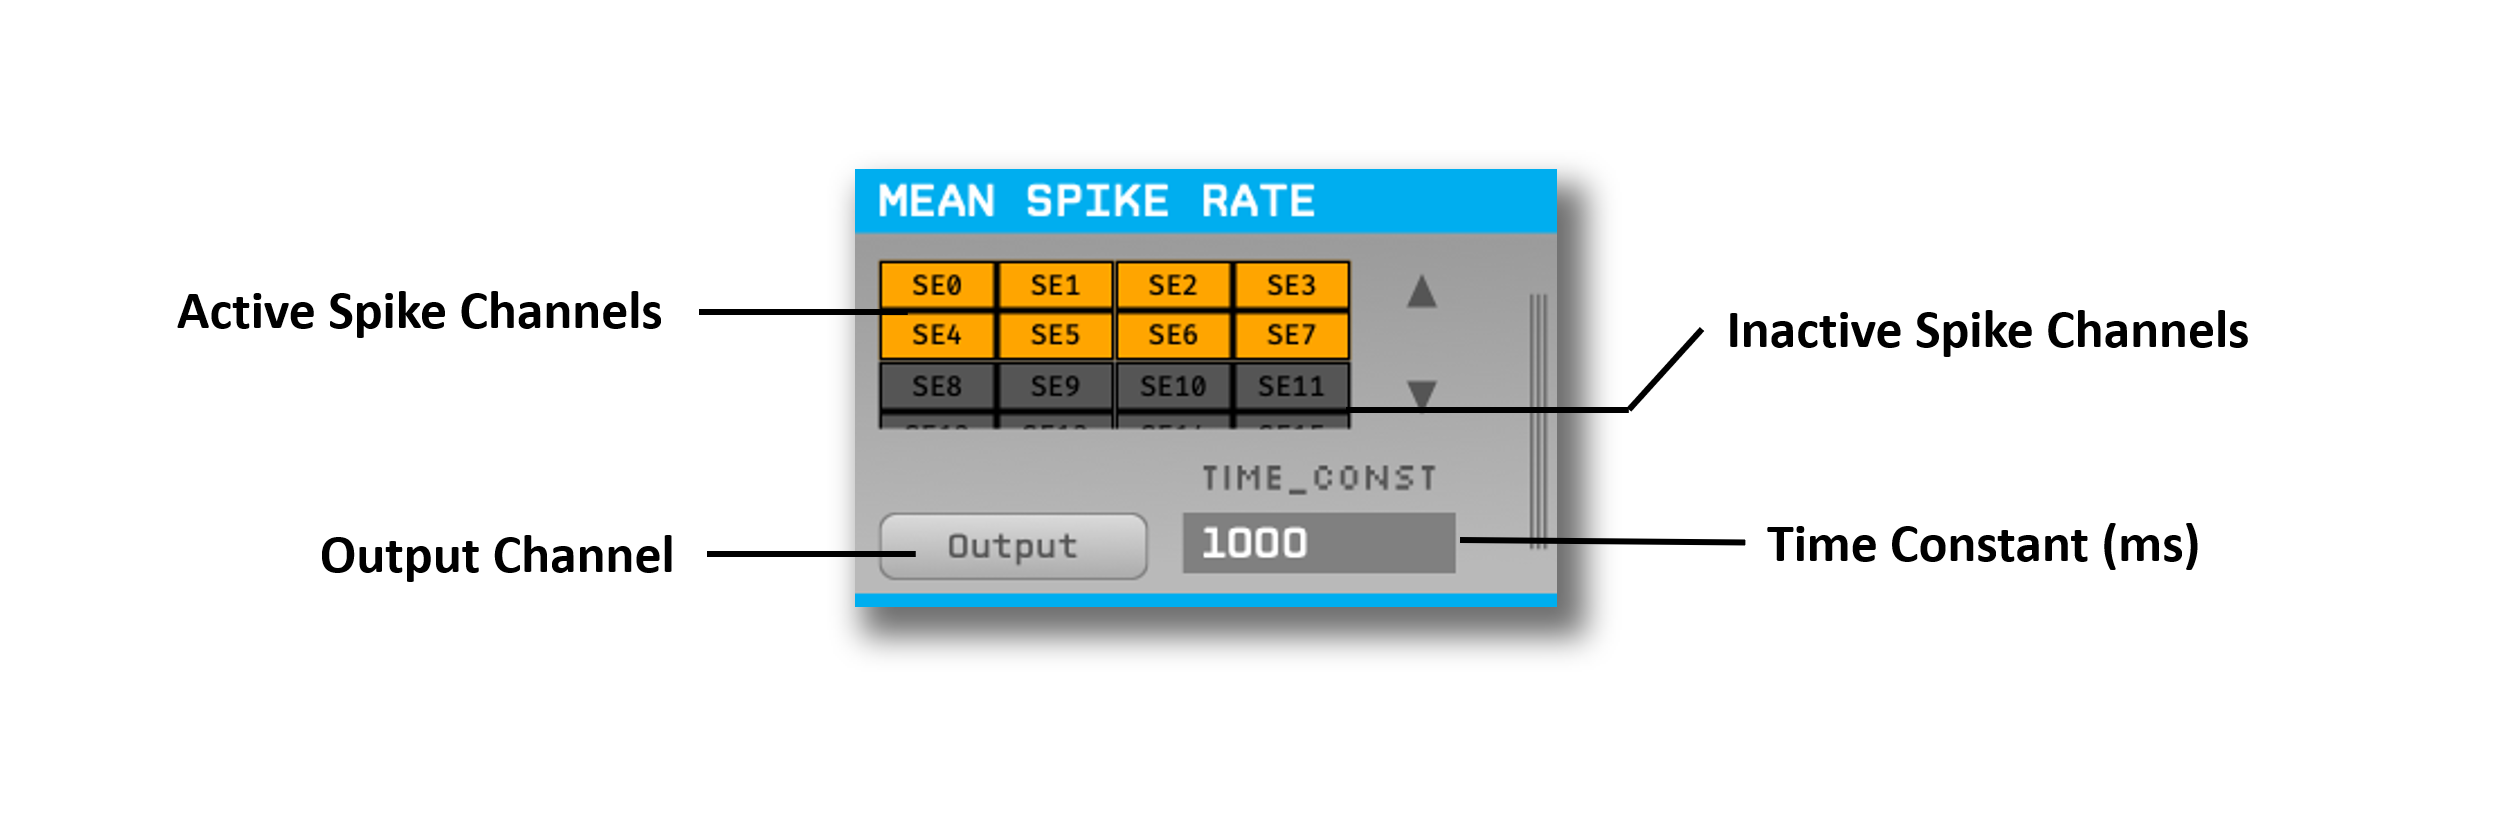 Annotated Mean Spike Rate editor